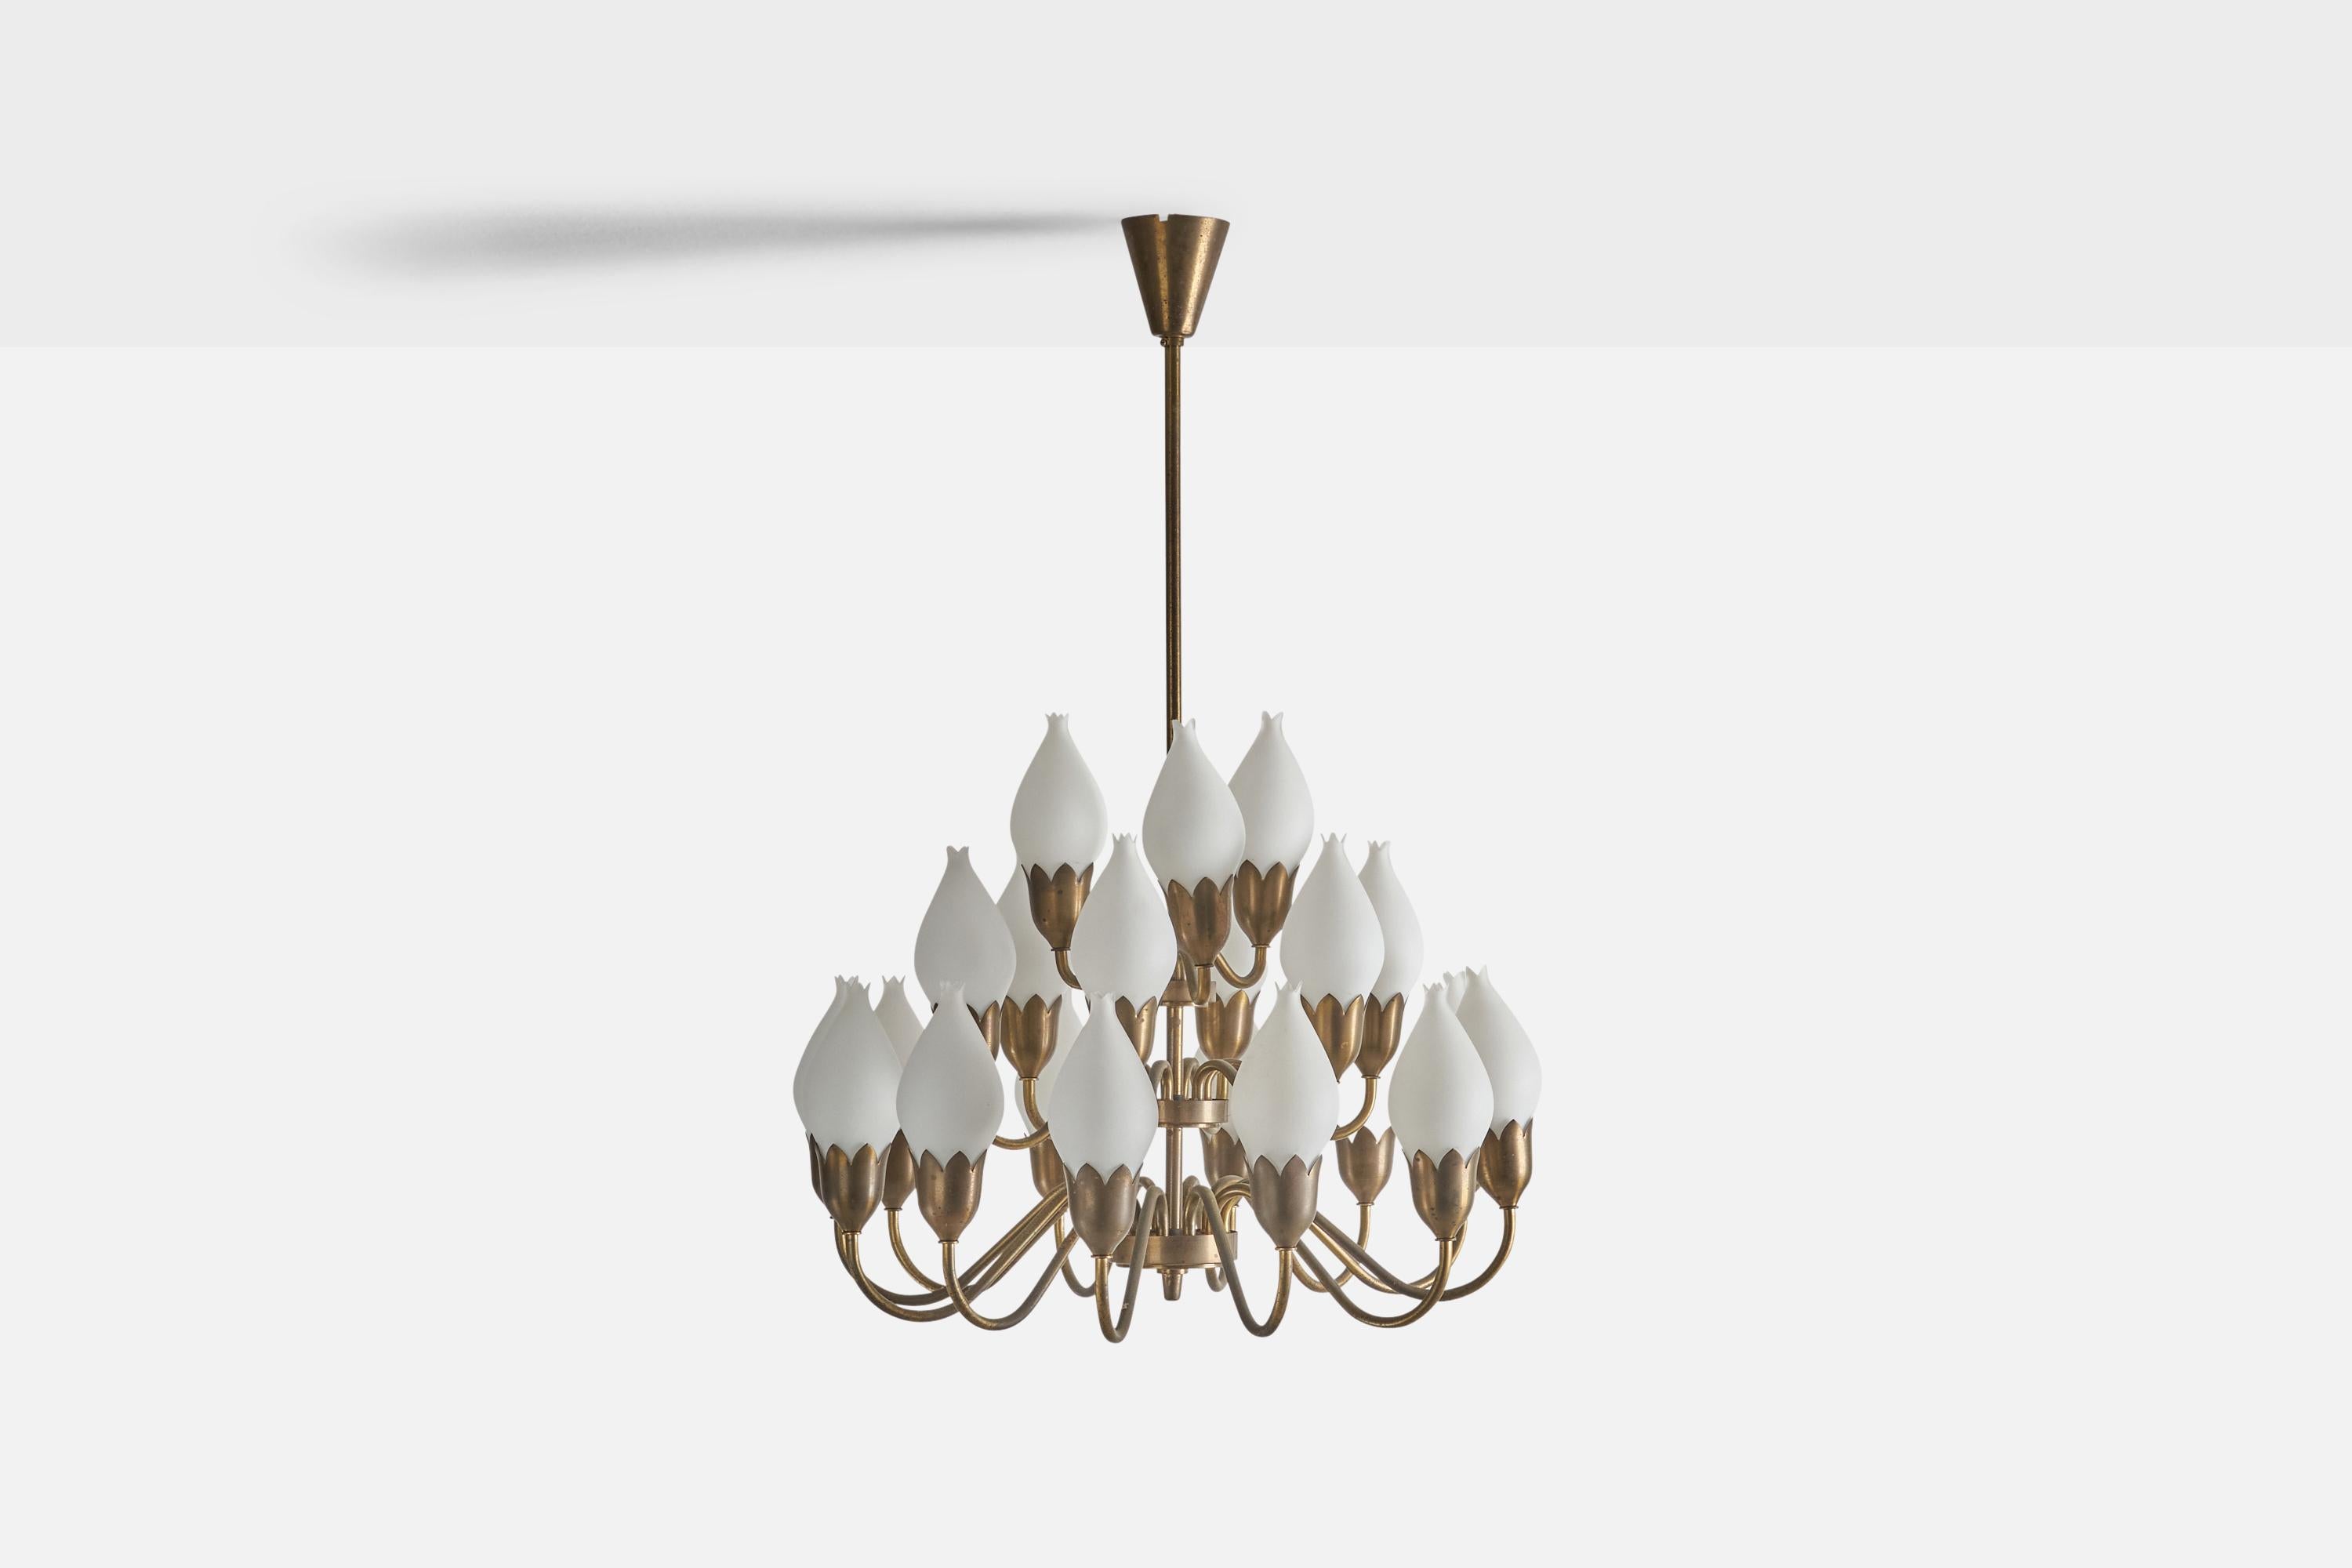 A 21-arm brass and milk glass chandelier designed and produced by Fog & Mørup, Denmark, 1940s.

Dimensions of Canopy (inches) : 3.5 x 3.35 x 3.35 (Height x Width x Depth)

Sockets take E-14 bulbs. 

There is no maximum wattage stated on the